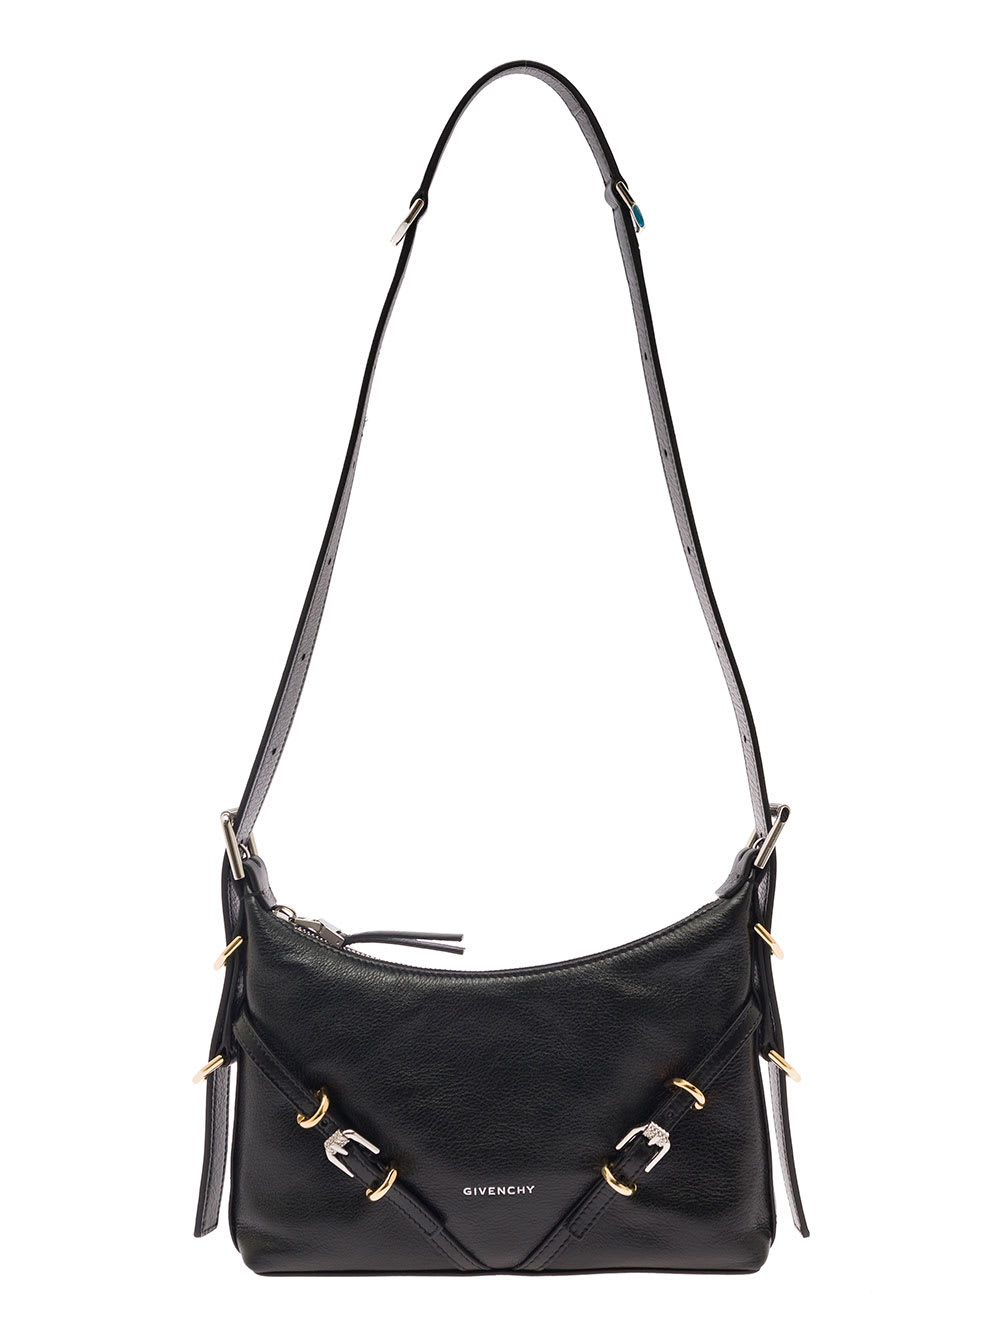 Givenchy Mini Voyou Black Shoulder Bag With Buckles Embellishment In Hammered Leather Woman